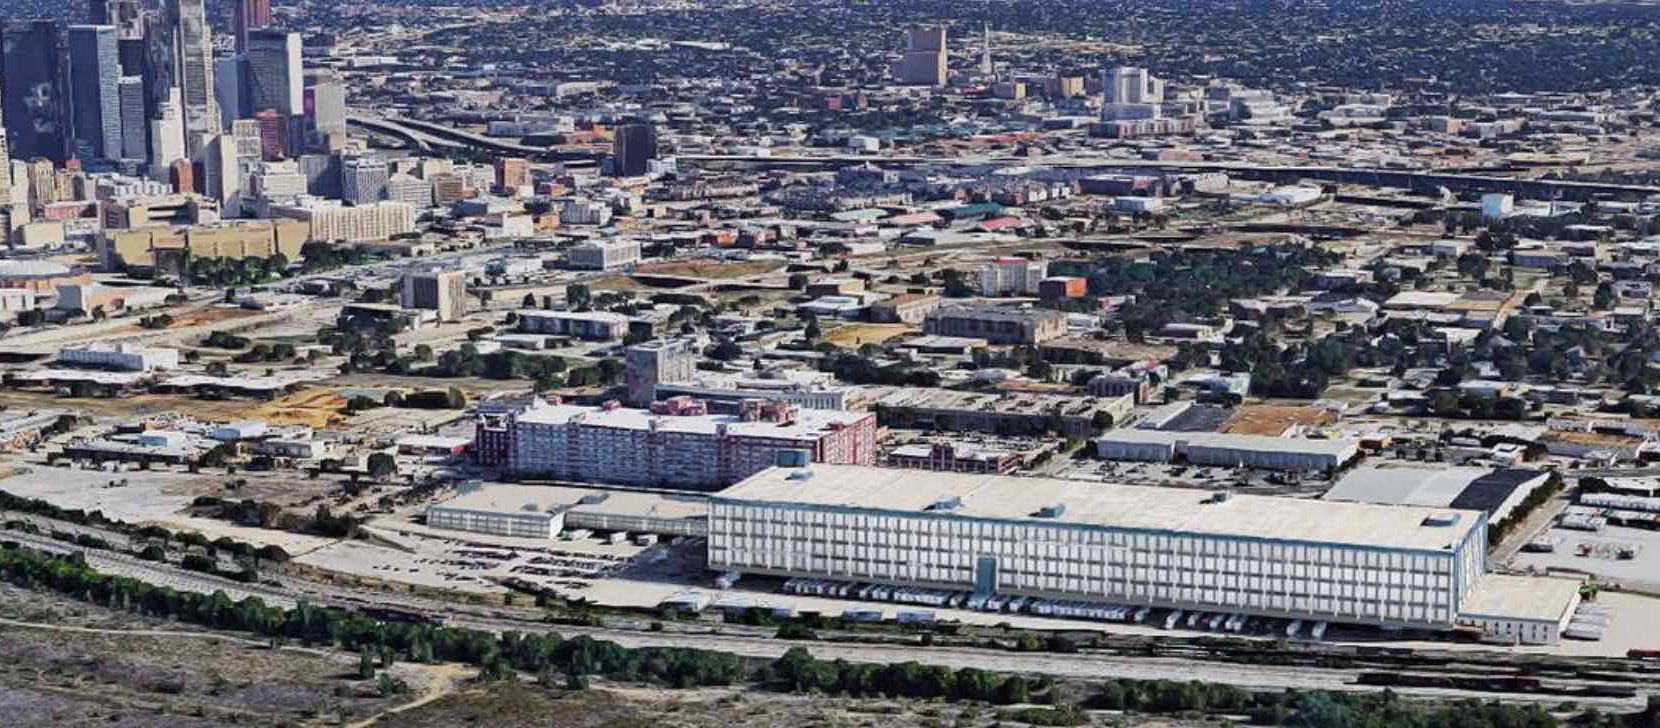 The former Sears warehouse complex stretches south of downtown Dallas near Corinth Street.